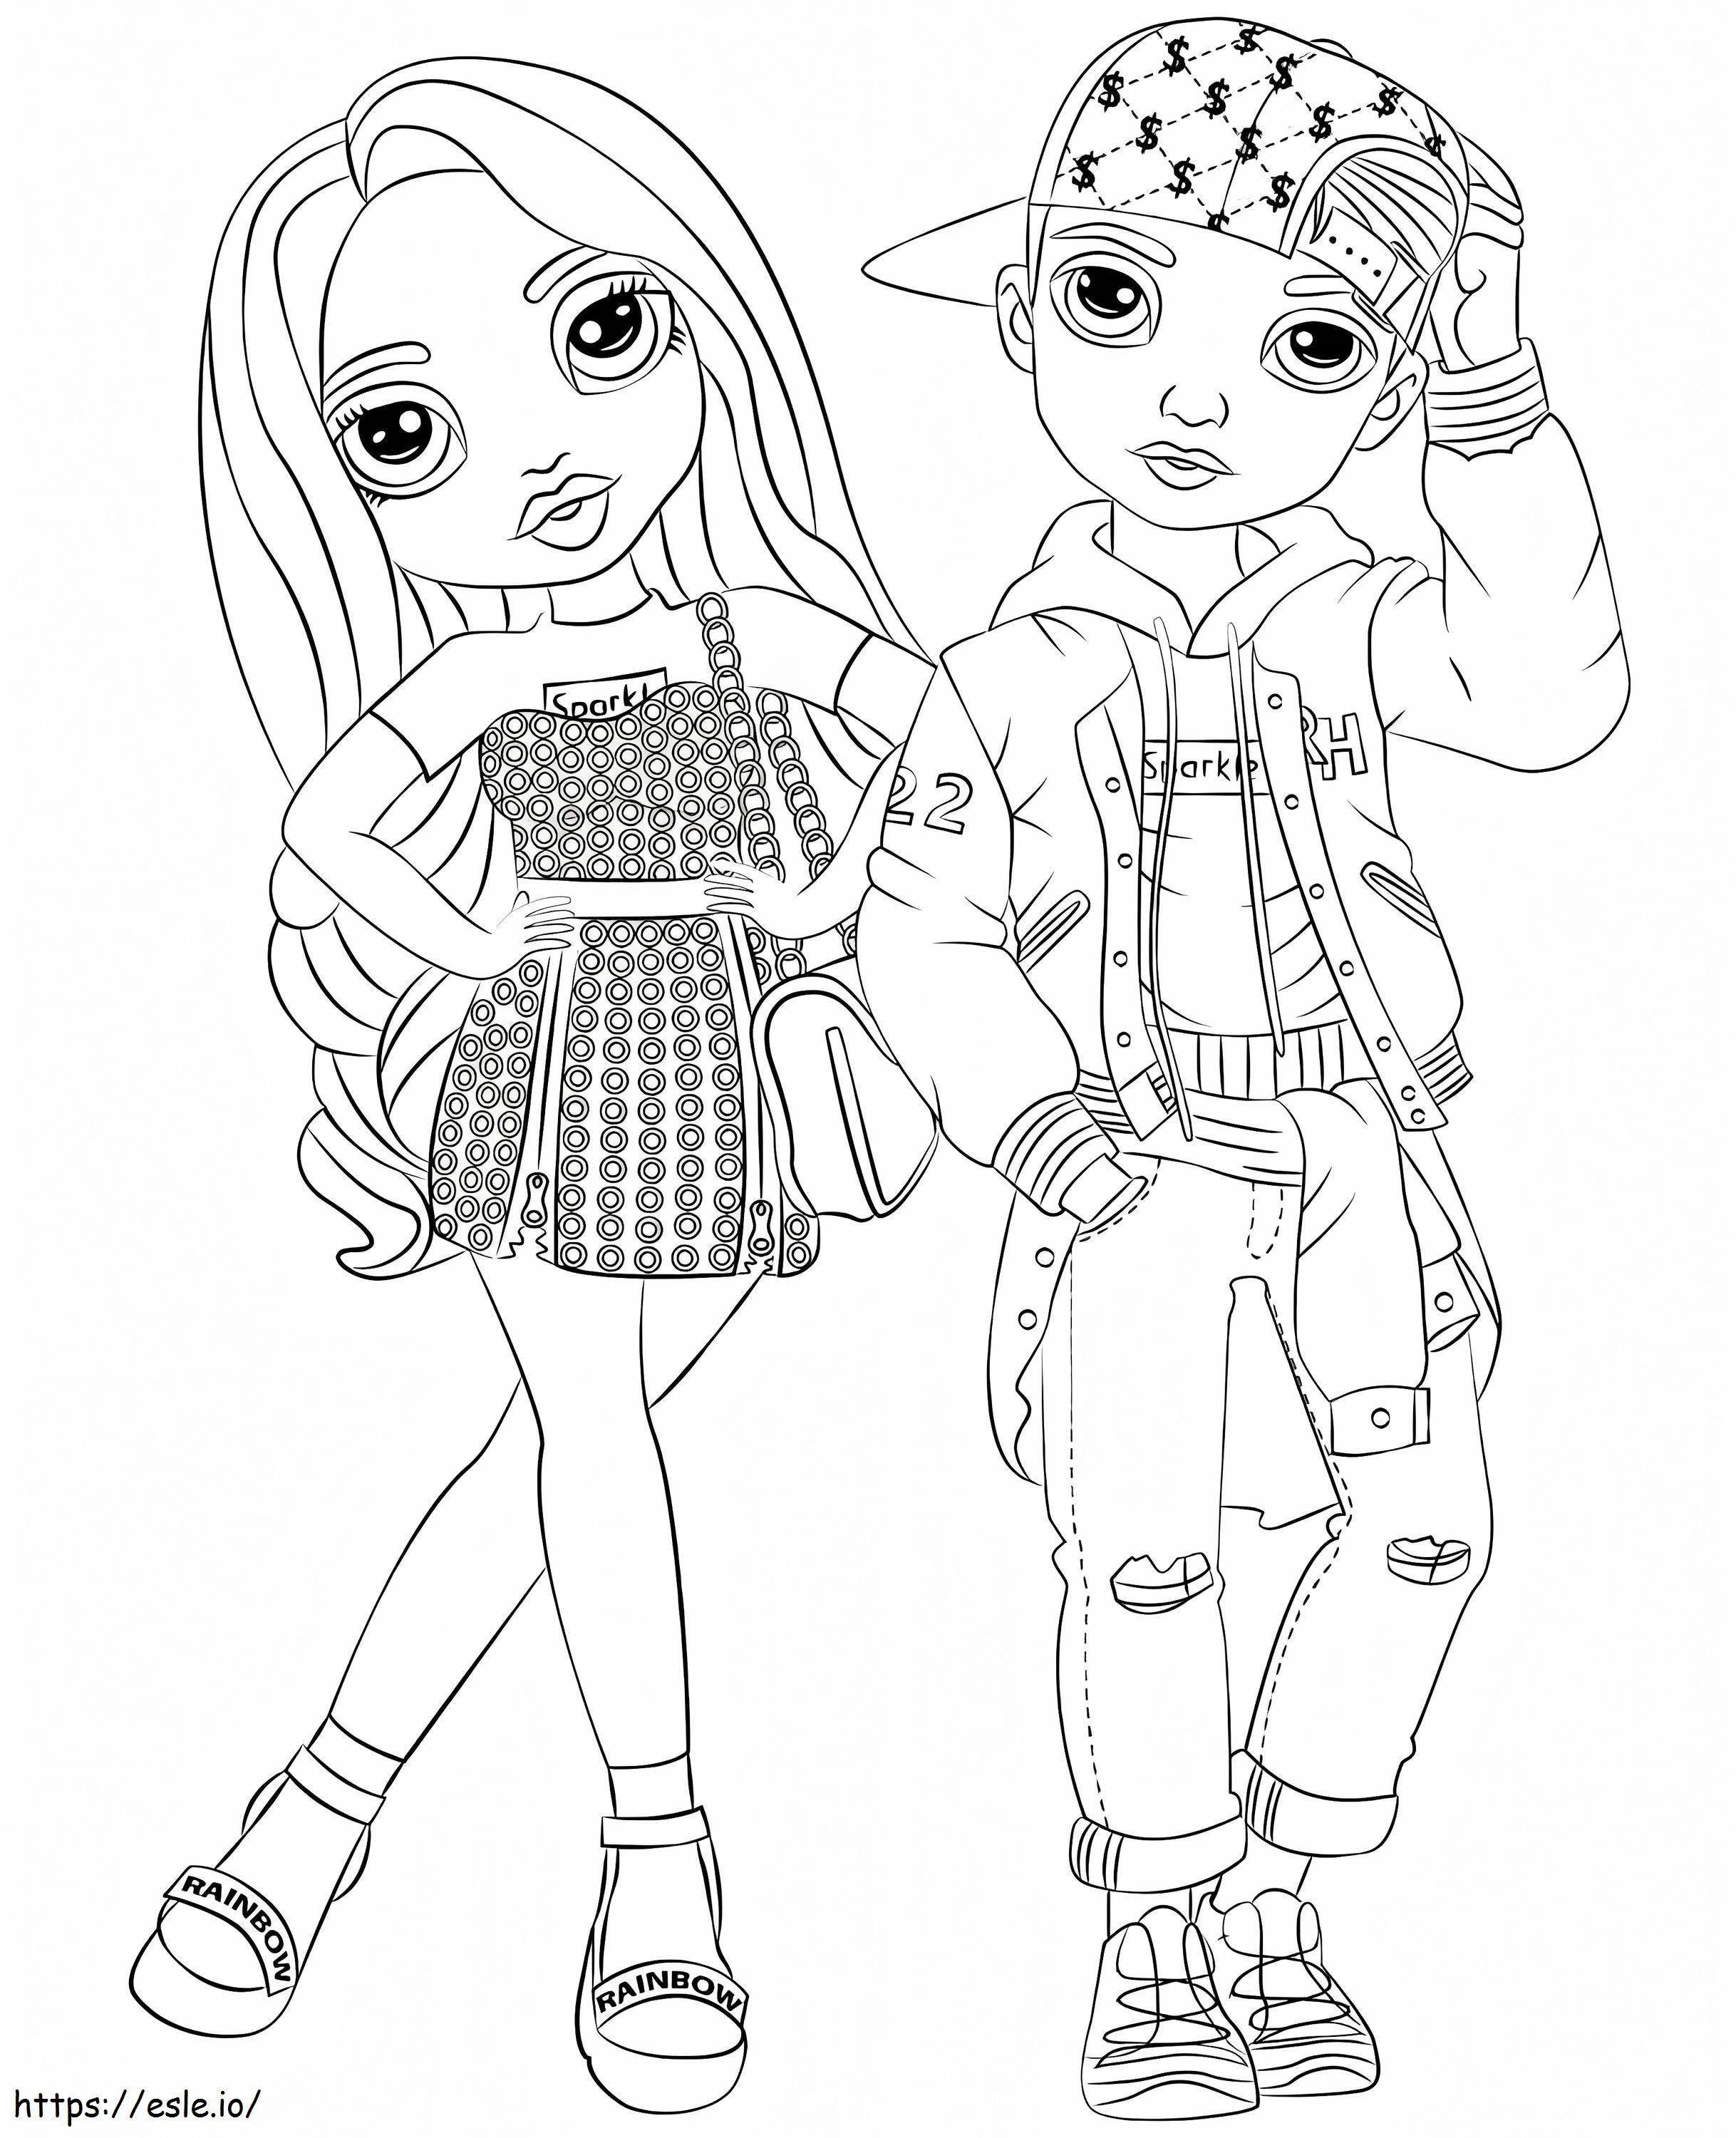 Rainbow High Dolls coloring page